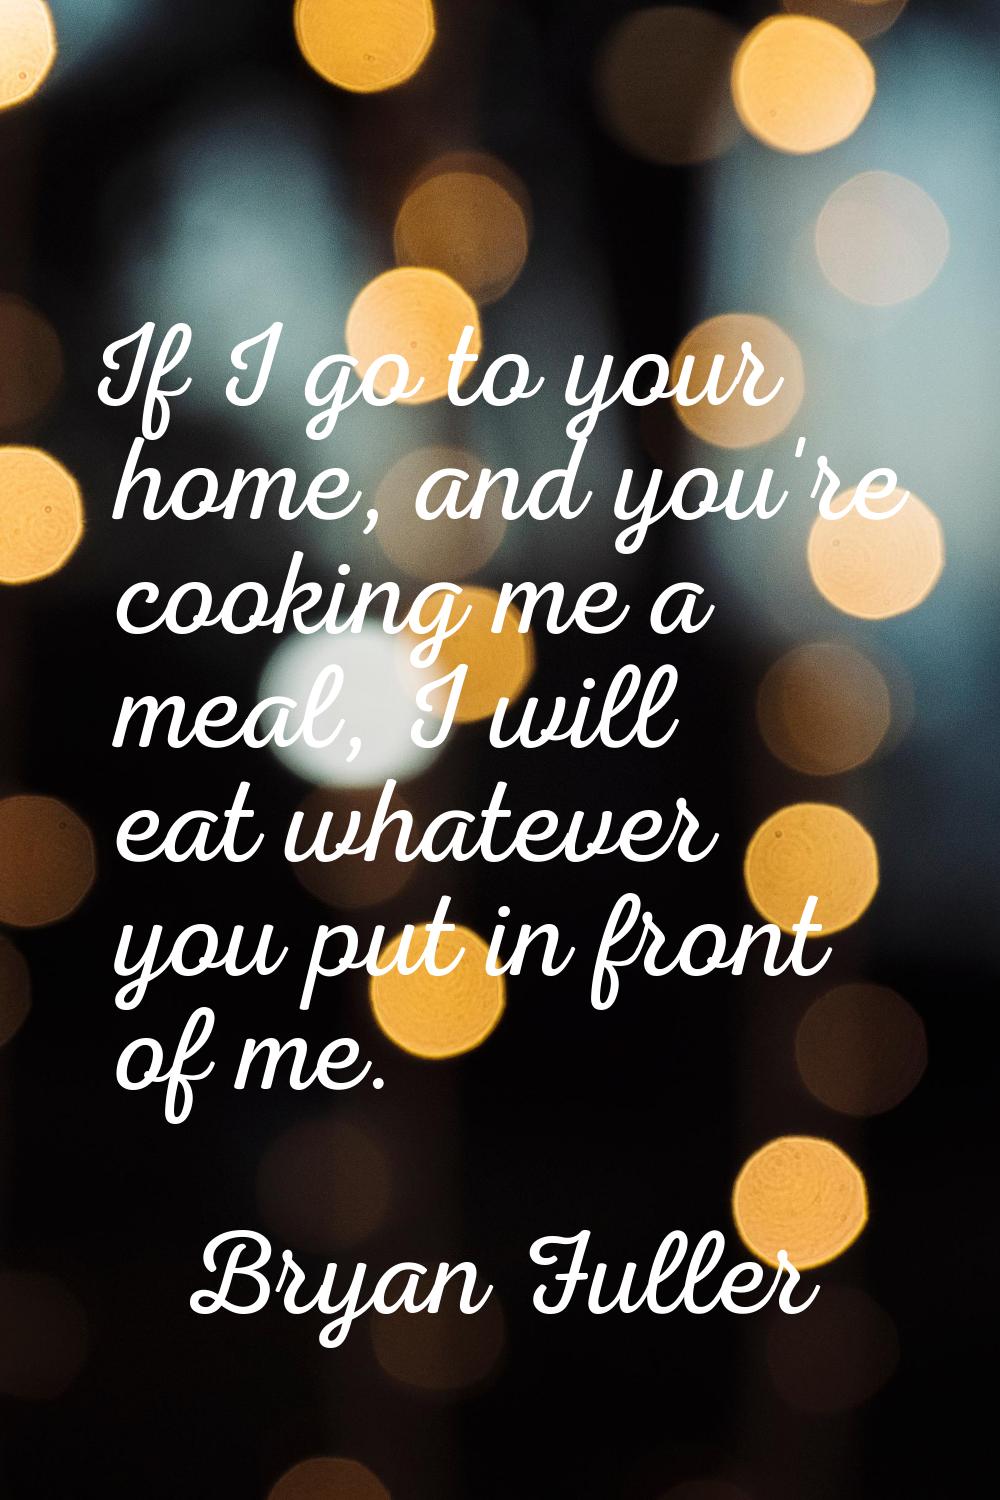 If I go to your home, and you're cooking me a meal, I will eat whatever you put in front of me.